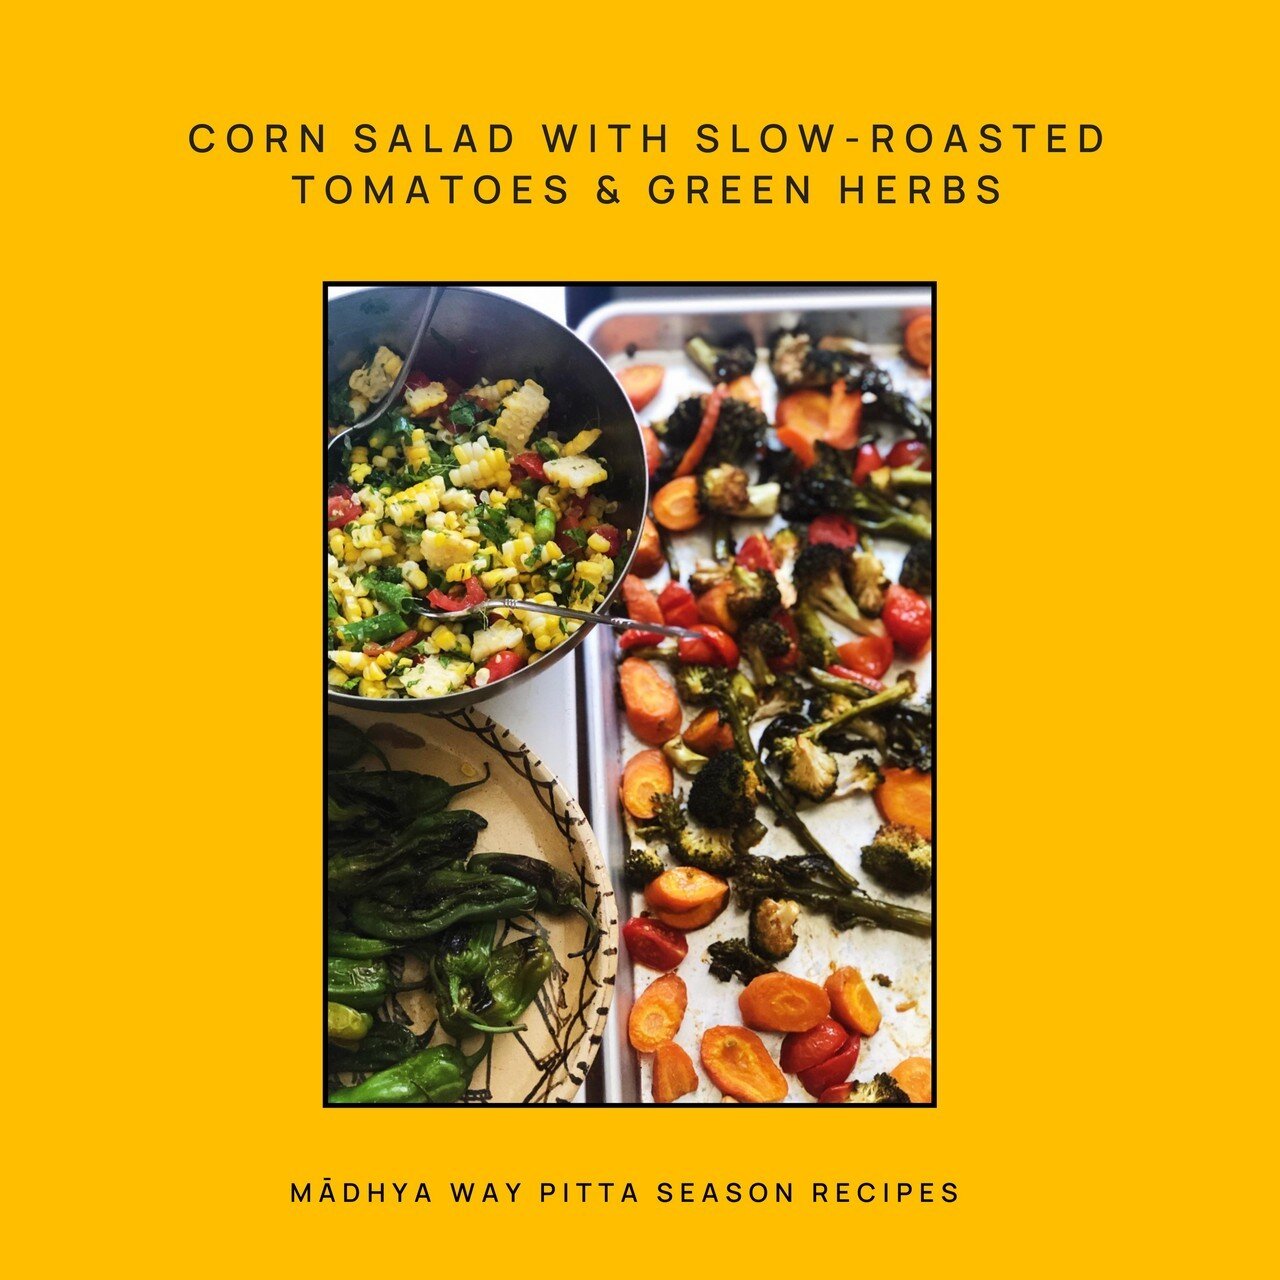 SAVE THIS RECIPE!!! This light and refreshing corn salad is the perfect addition to any warm weather meal. Interested in some doshas specific modifications? Keep swiping till the end!